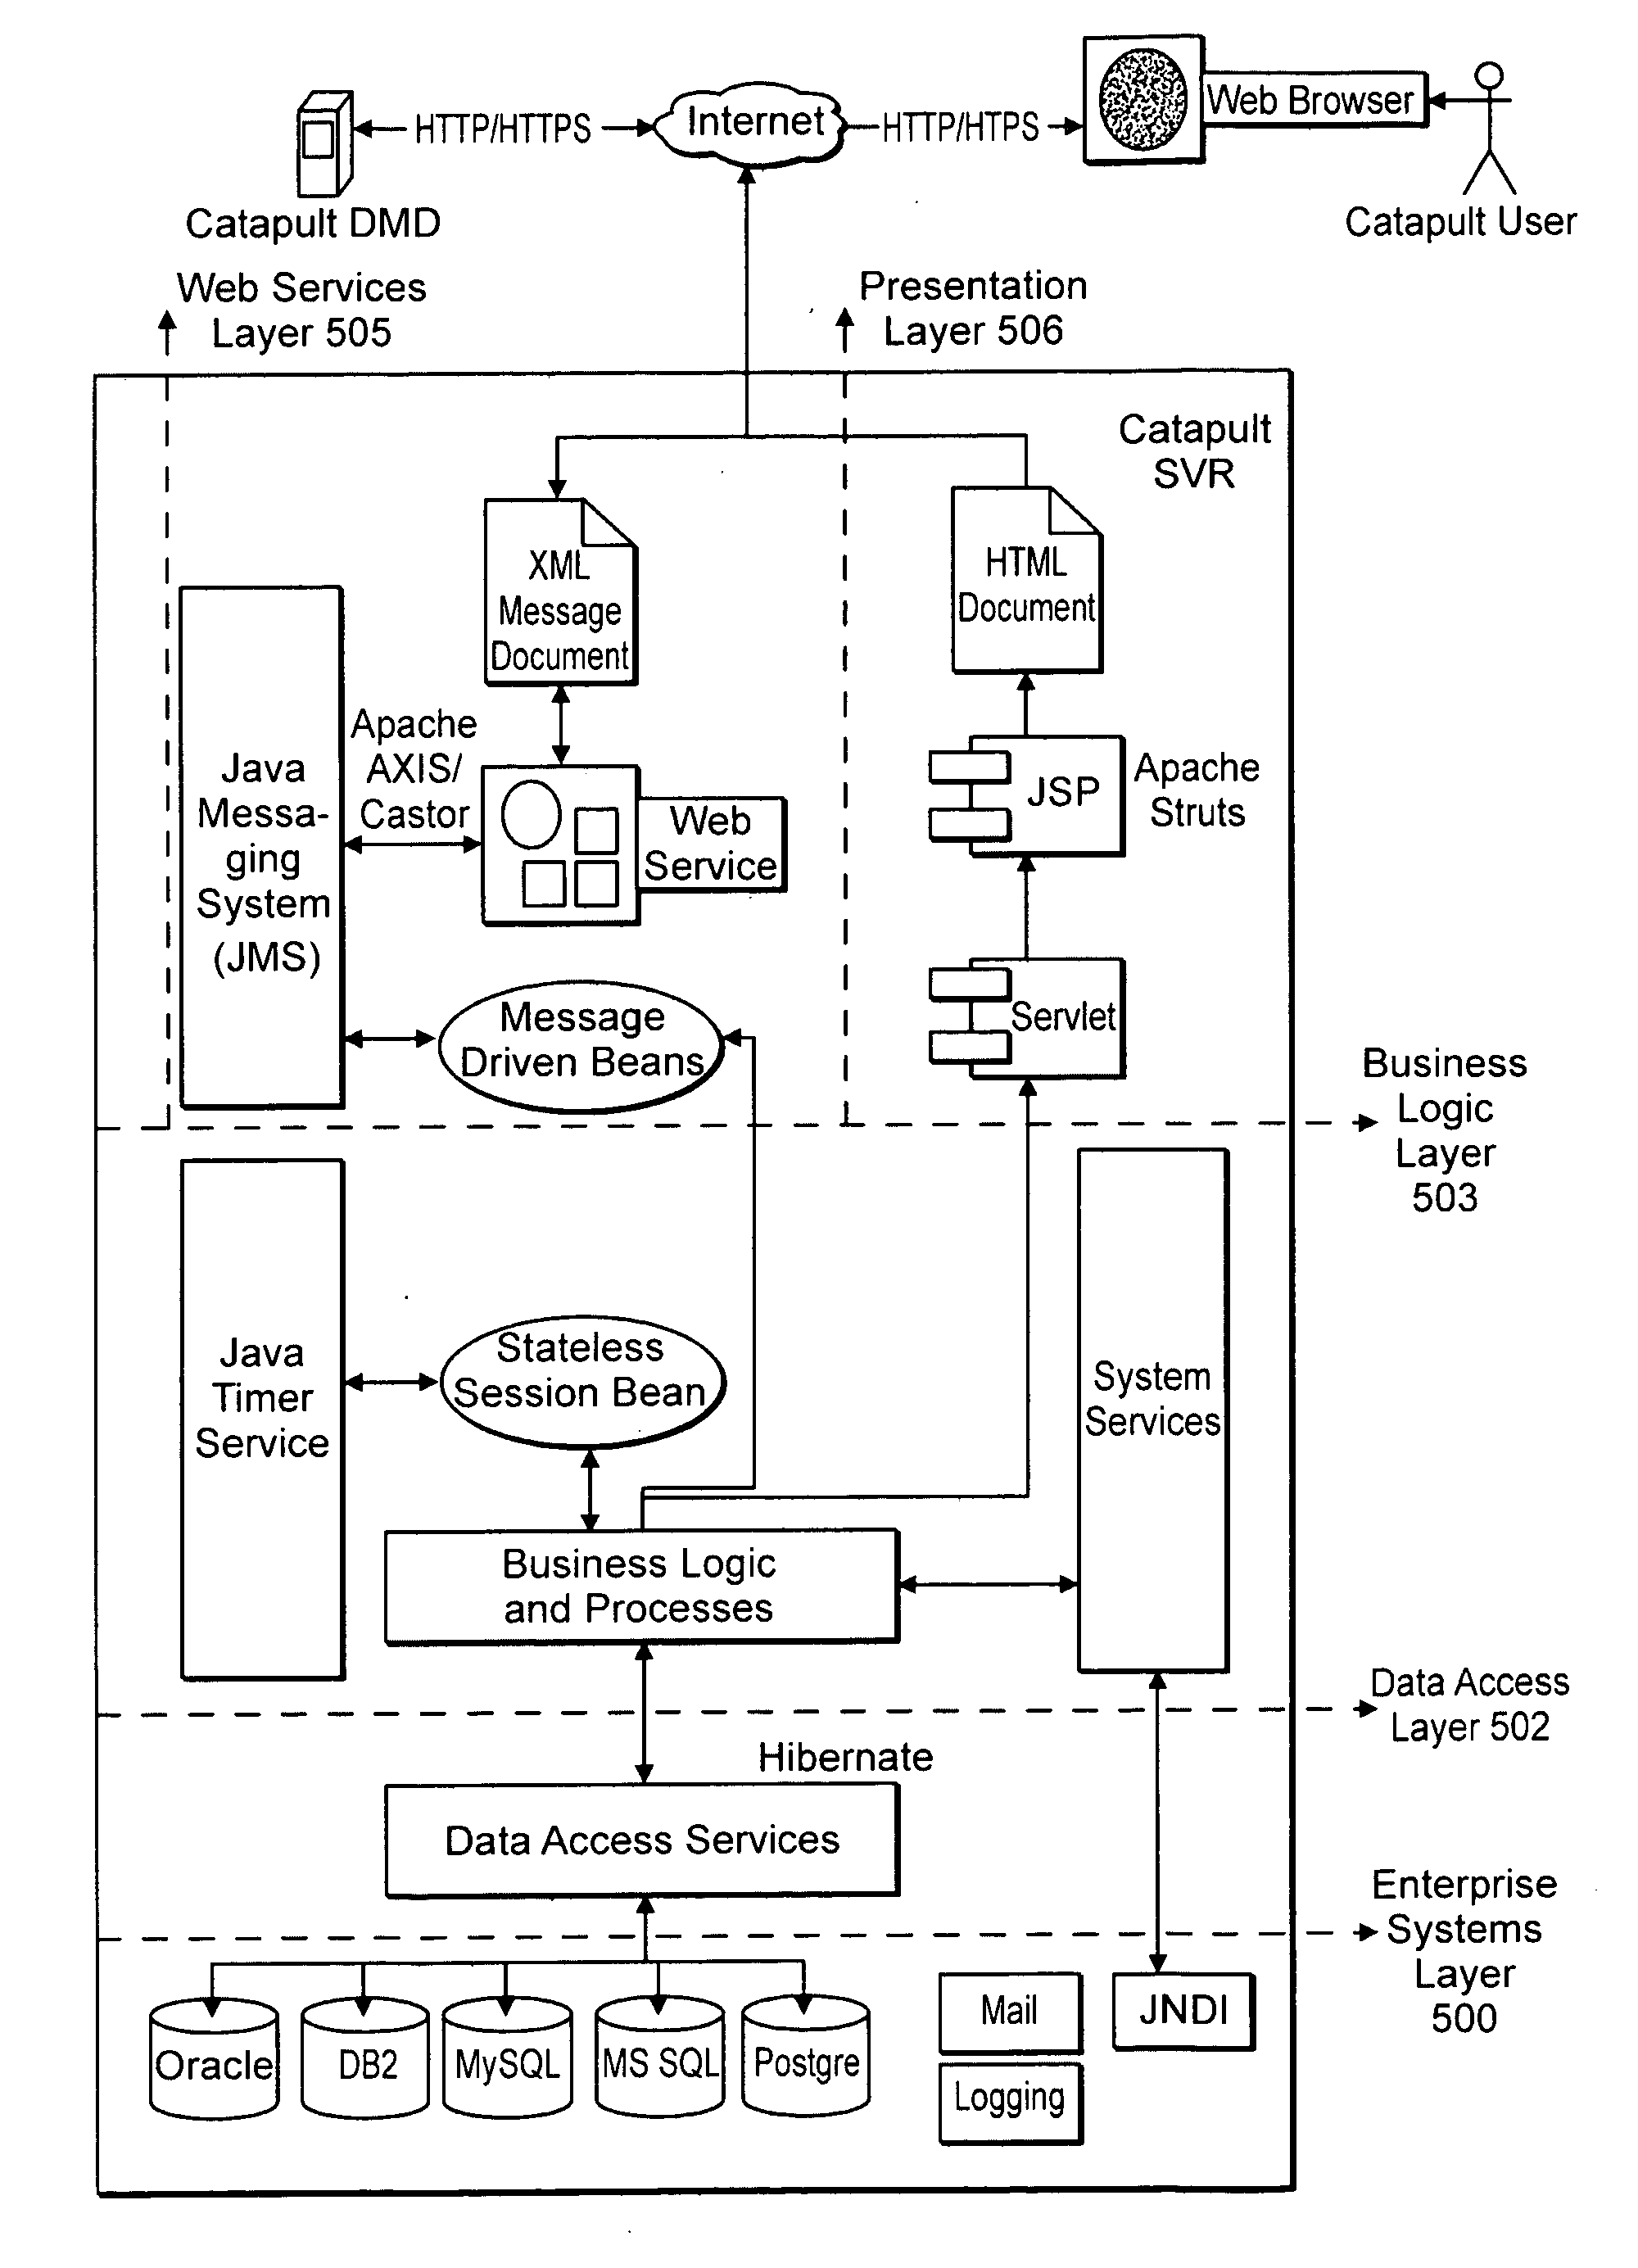 Apparatus and method for managing a network of intelligent devices